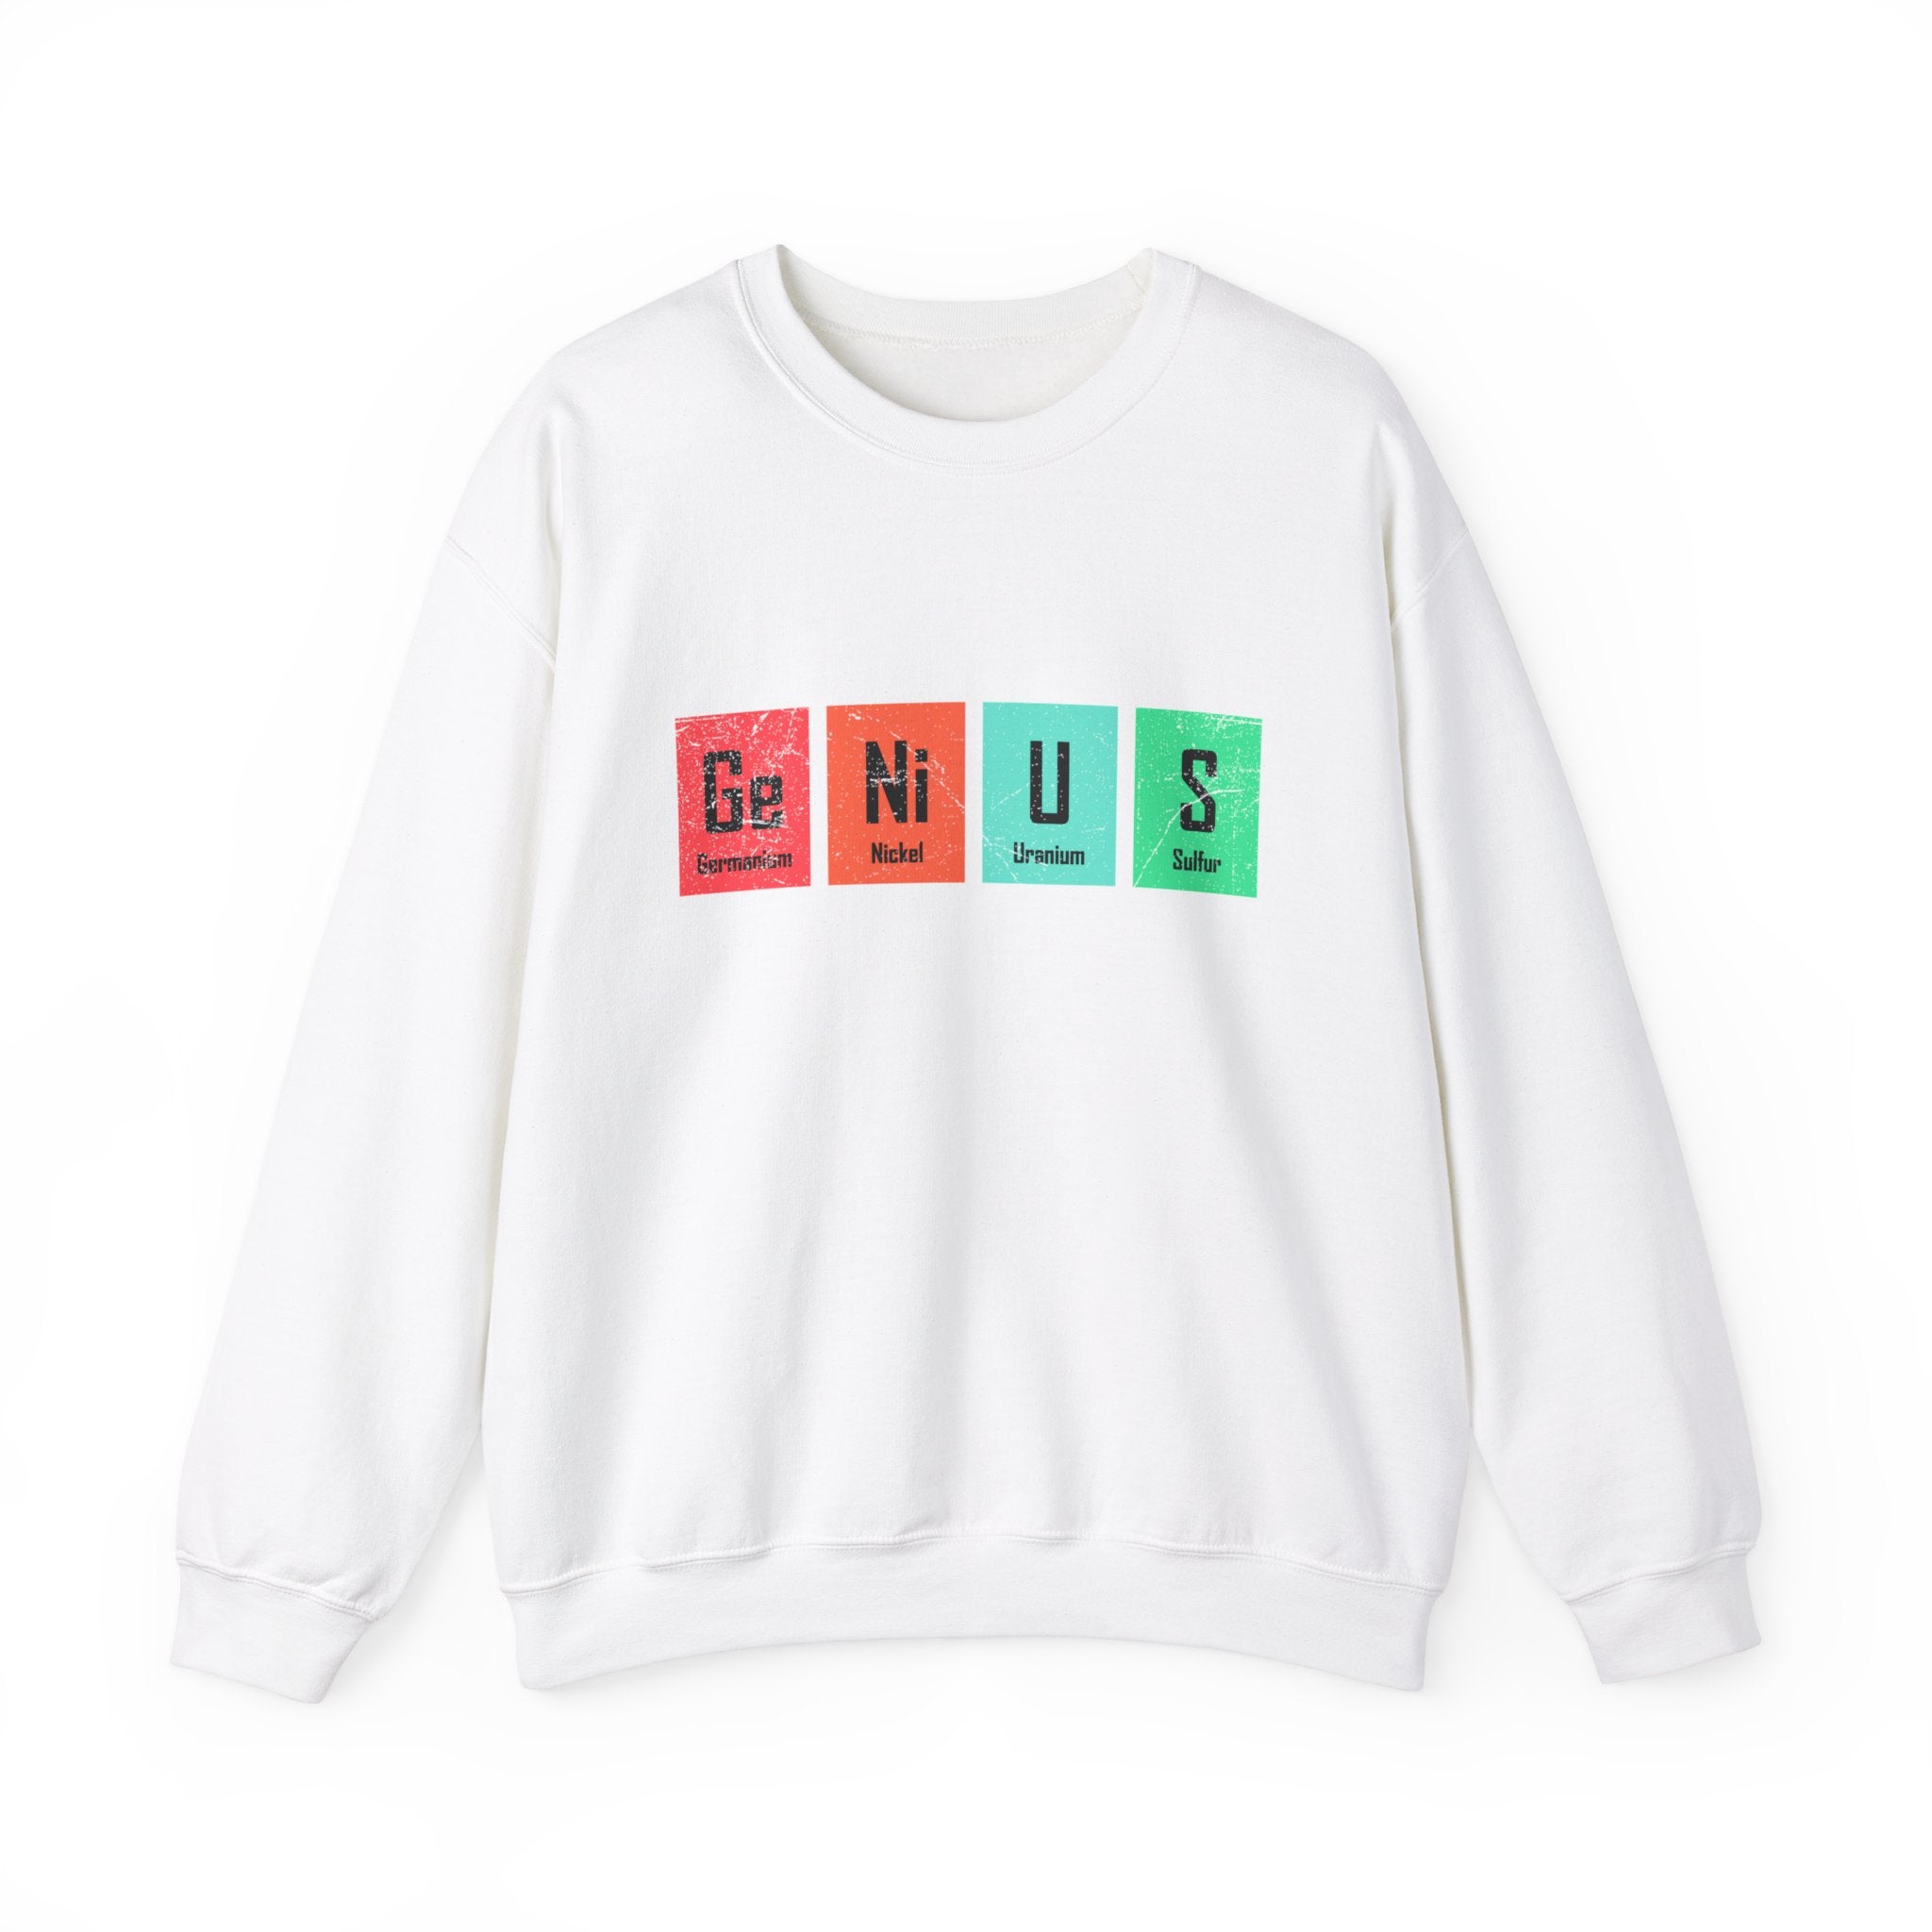 White stylish Ge-Ni-U-S - Sweatshirt with the word "GENIUS" spelled out using colored periodic table element blocks—Germanium (Ge), Nickel (Ni), Uranium (U), and Sulfur (S). This cozy Ge-Ni-U-S design makes it both a smart choice for comfort and a clever expression of style.